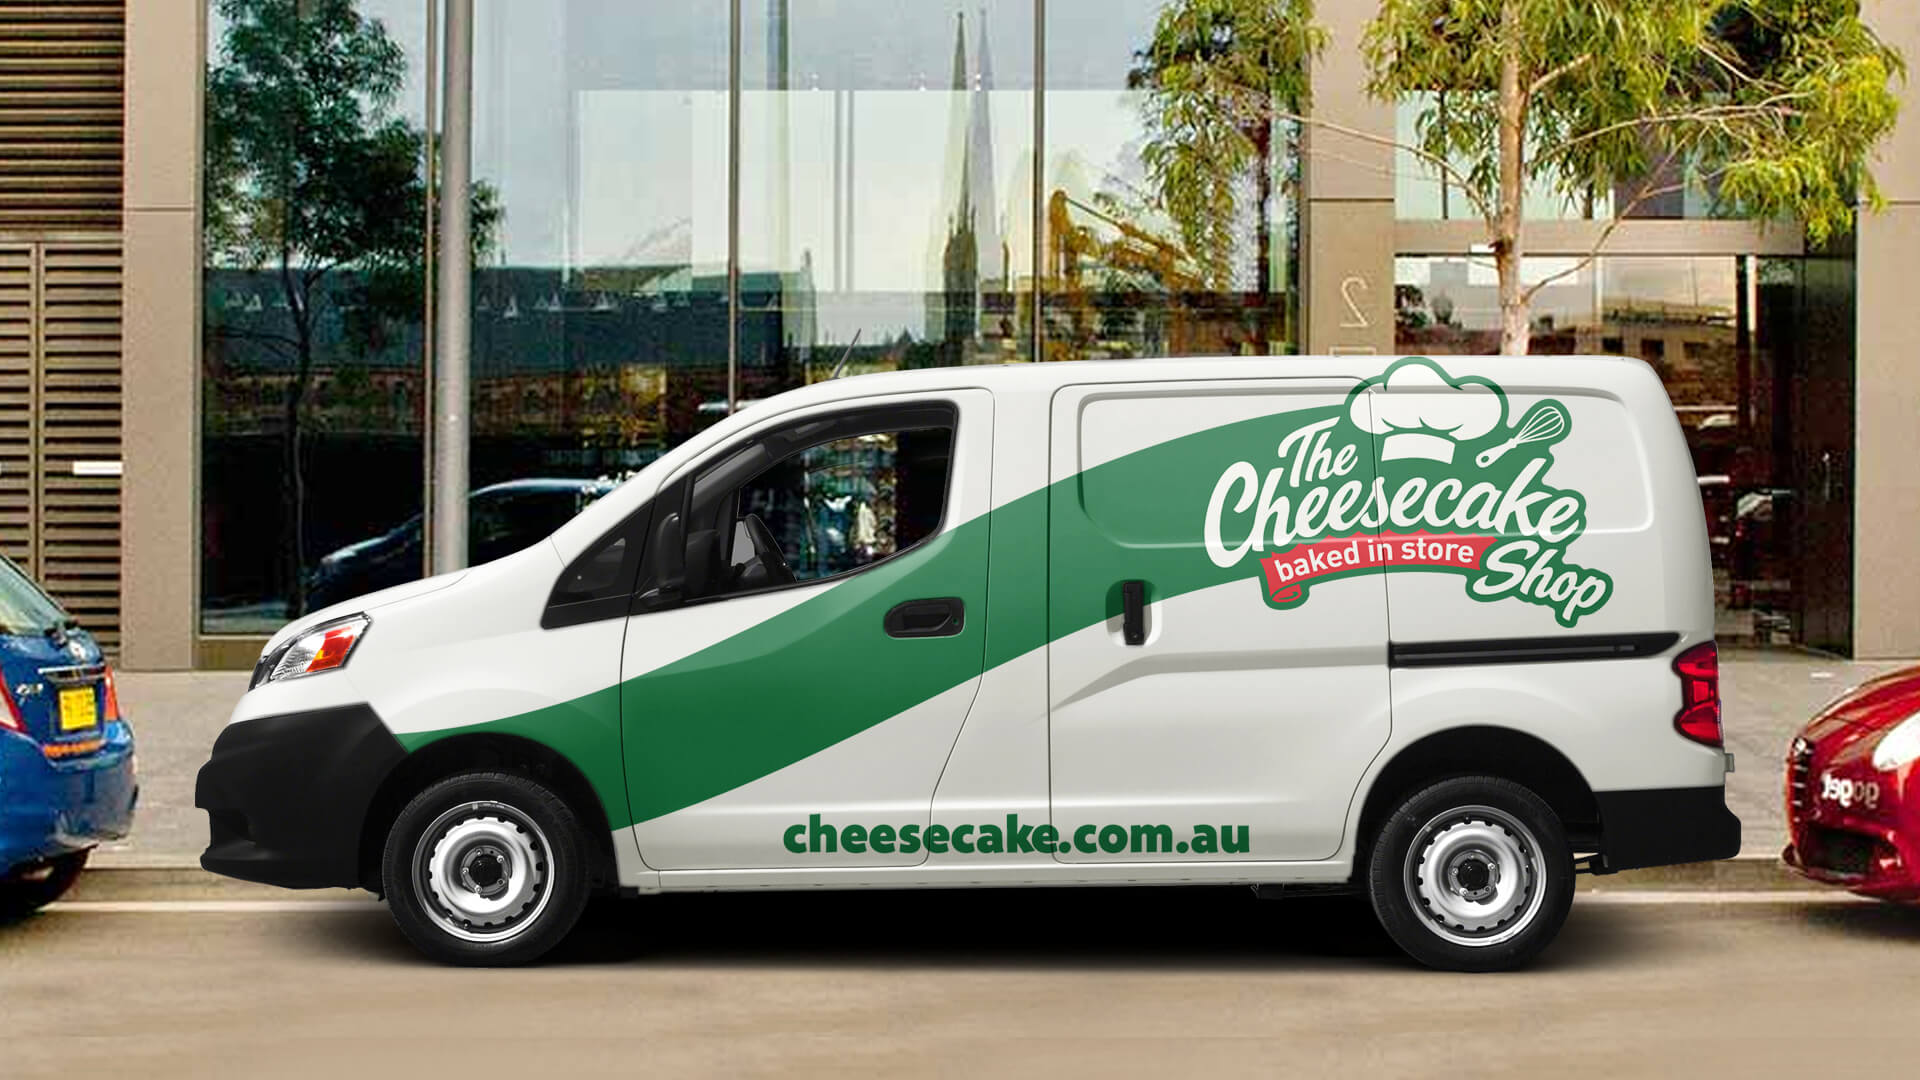 Marketing and Design Agency - Poloko - Northern Beaches - Cheesecake Shop